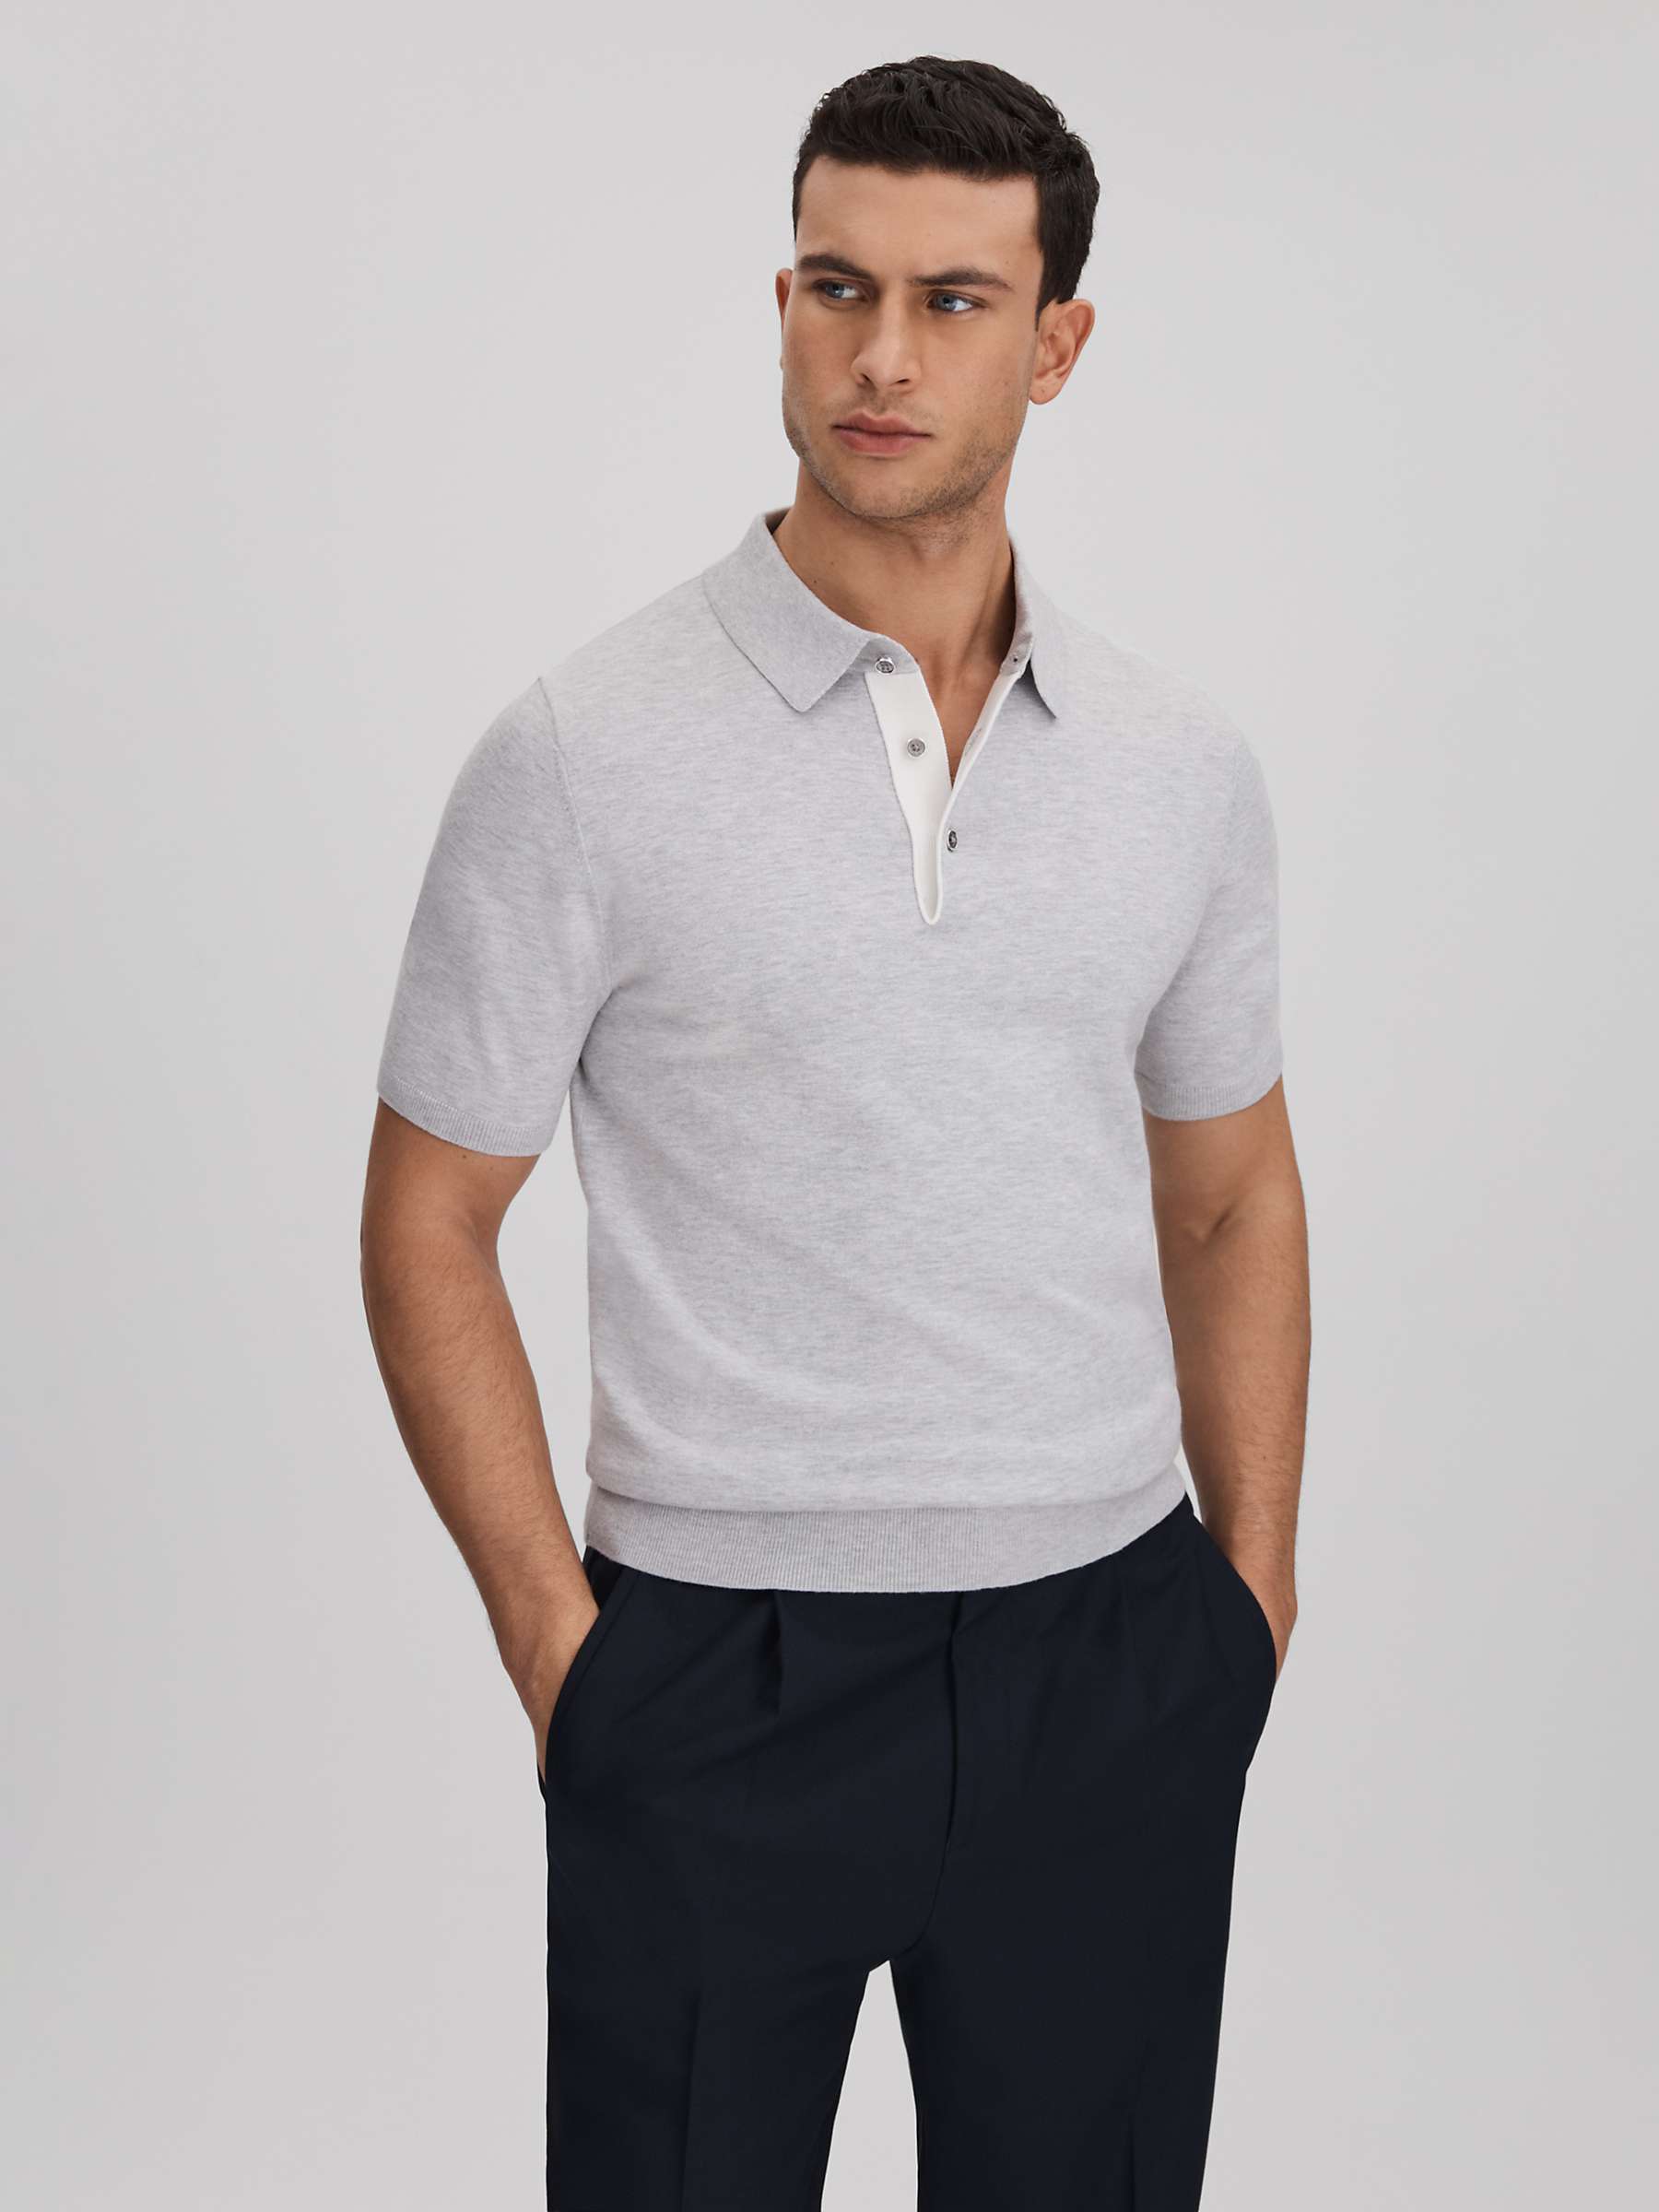 Buy Reiss Finch Knit Polo Shirt, Soft Grey Online at johnlewis.com